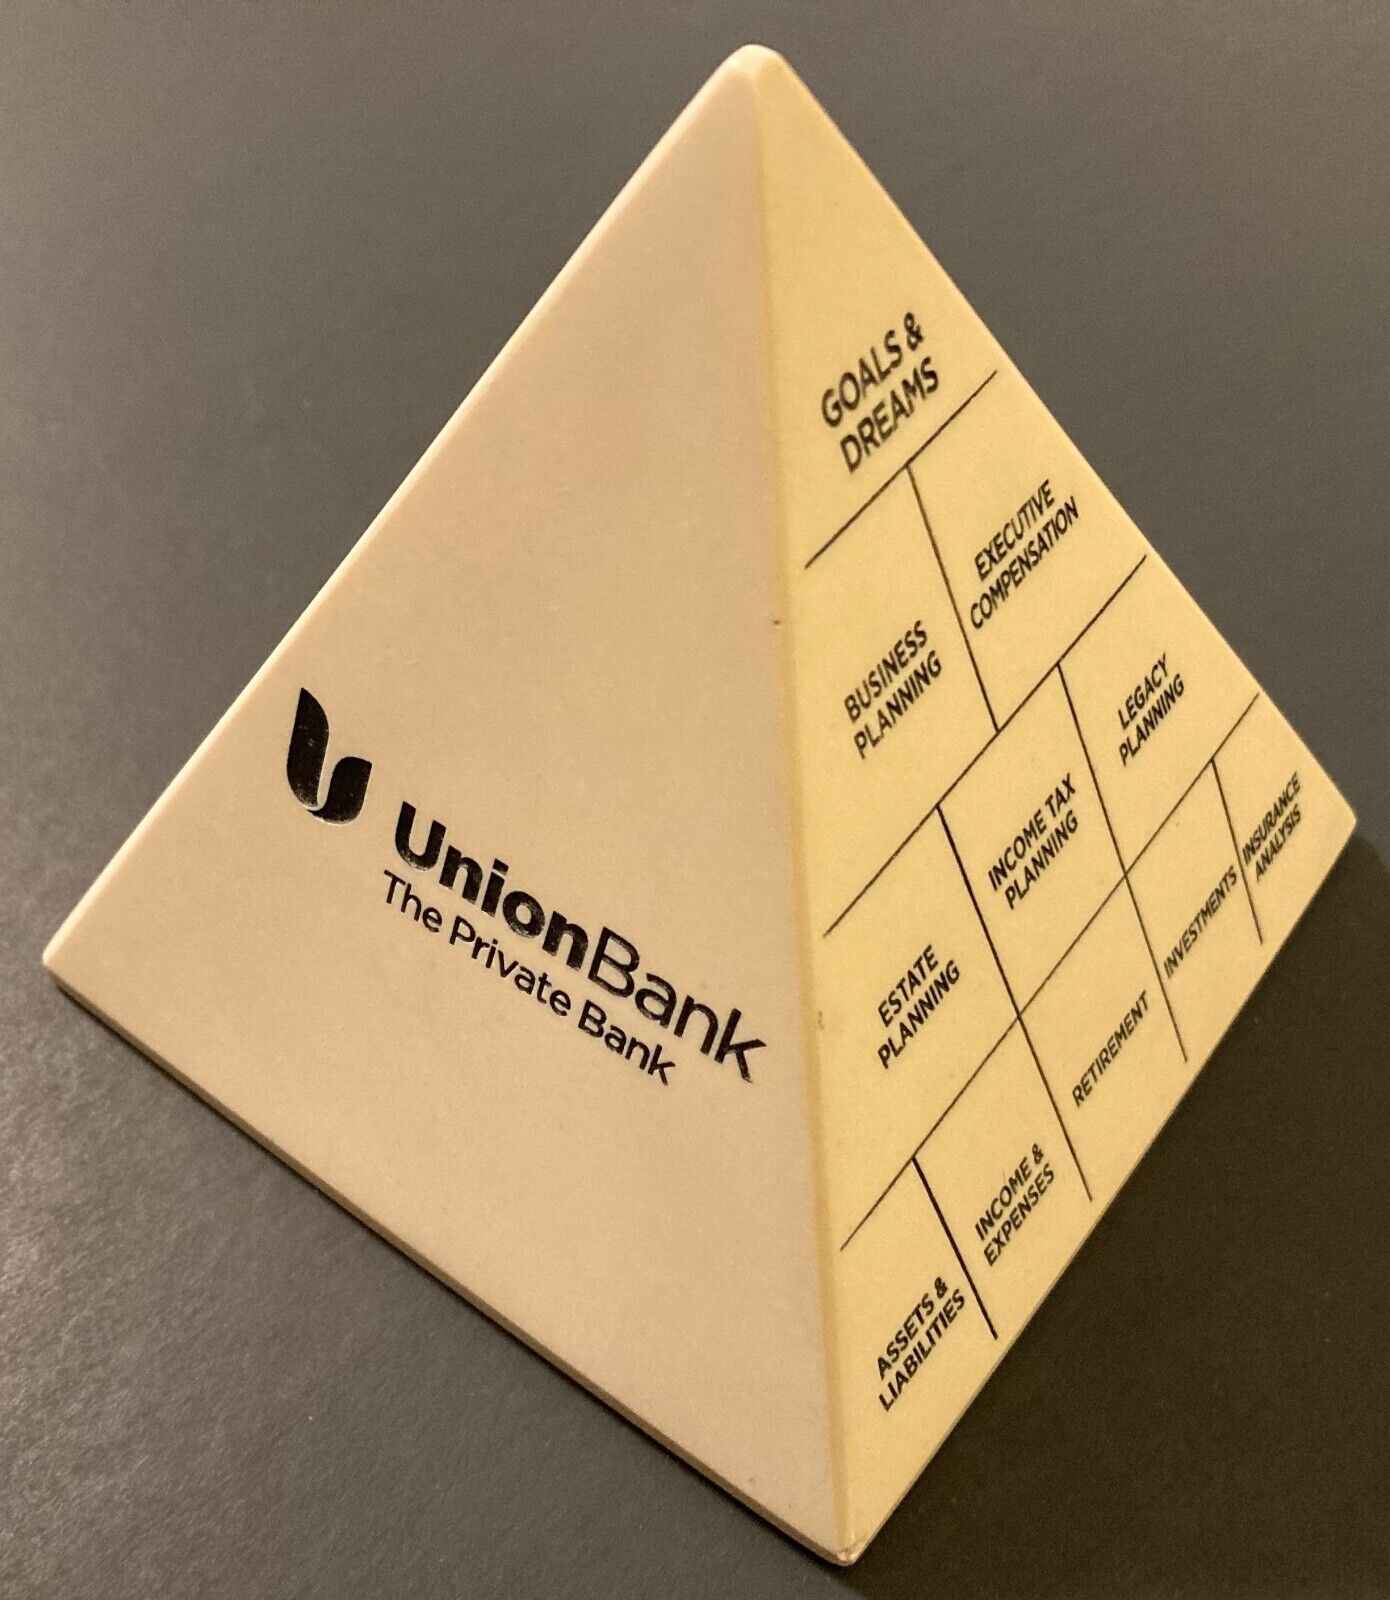 Defunct UNION BANK Pyramid Paperweight